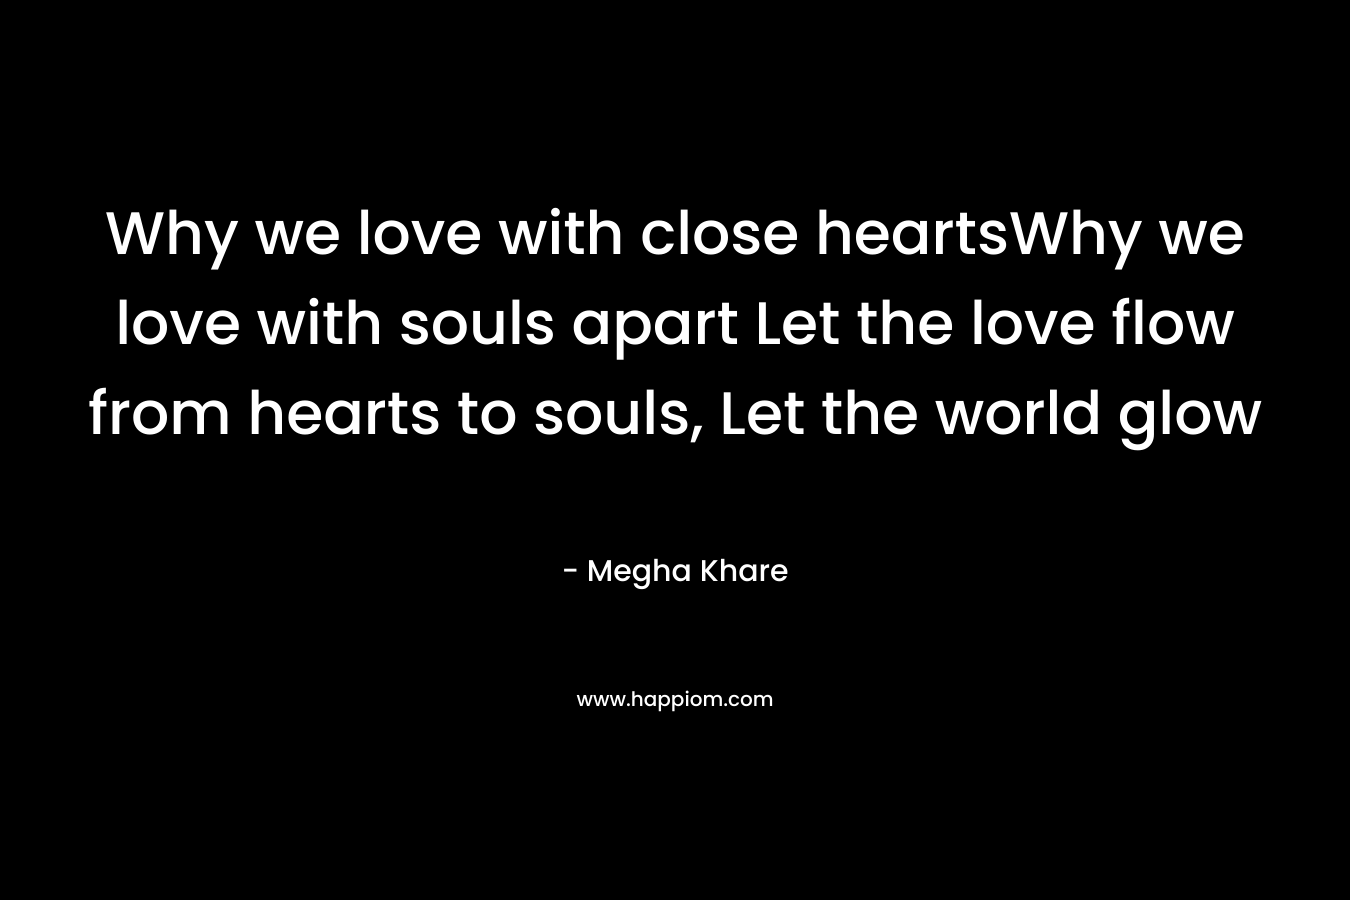 Why we love with close heartsWhy we love with souls apart Let the love flow from hearts to souls, Let the world glow